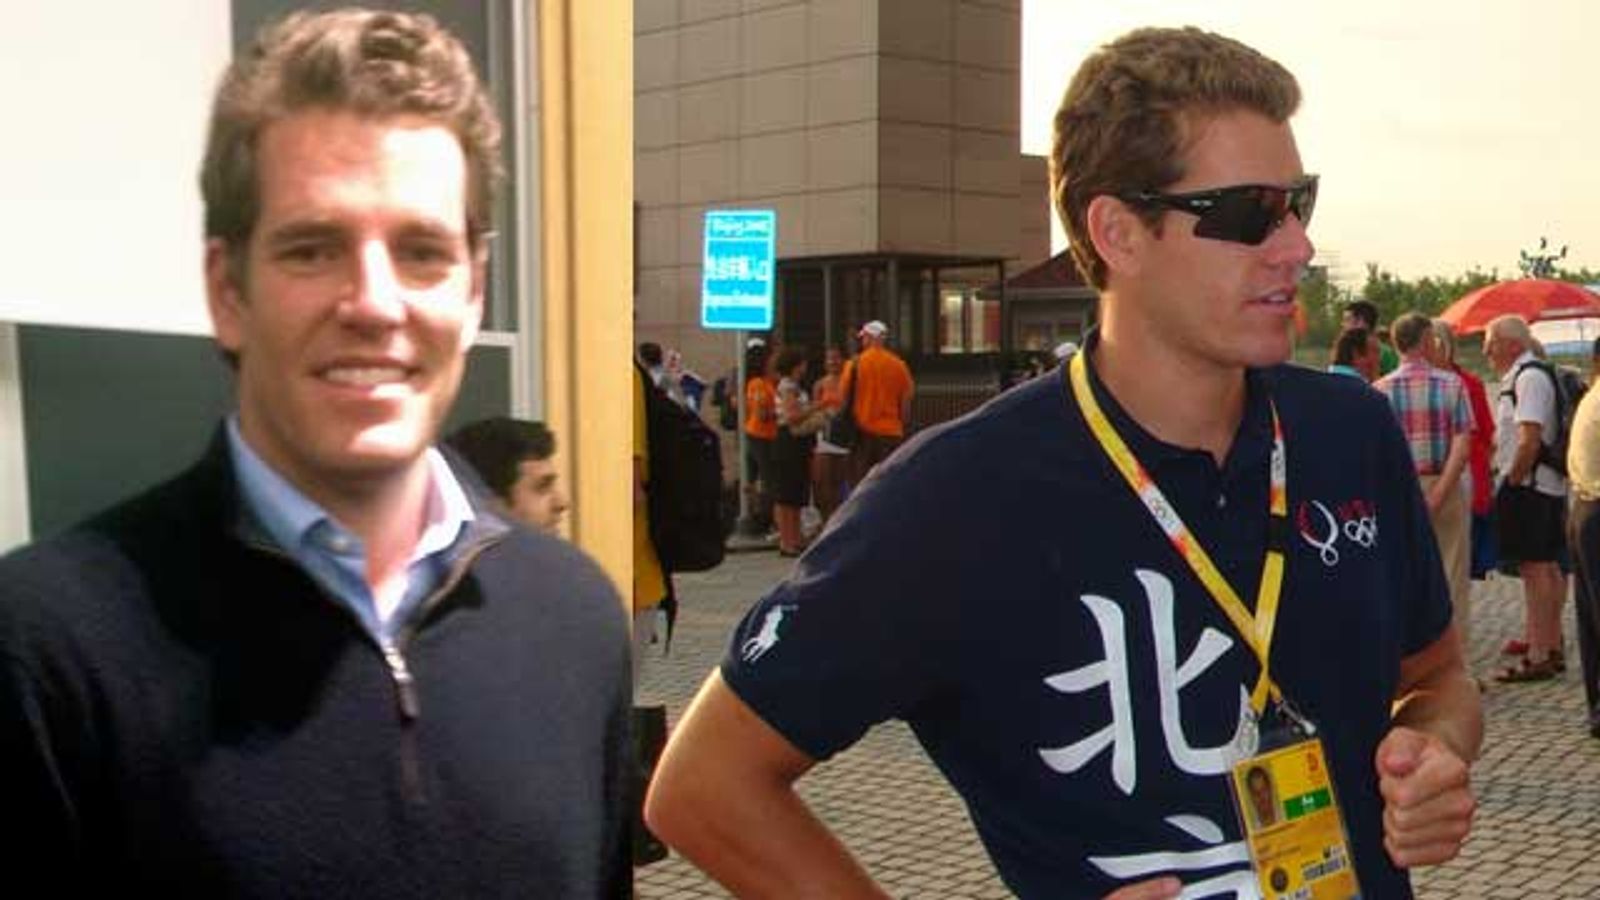 Winklevoss Twins File SEC Request to Operate Bitcoin Exchange